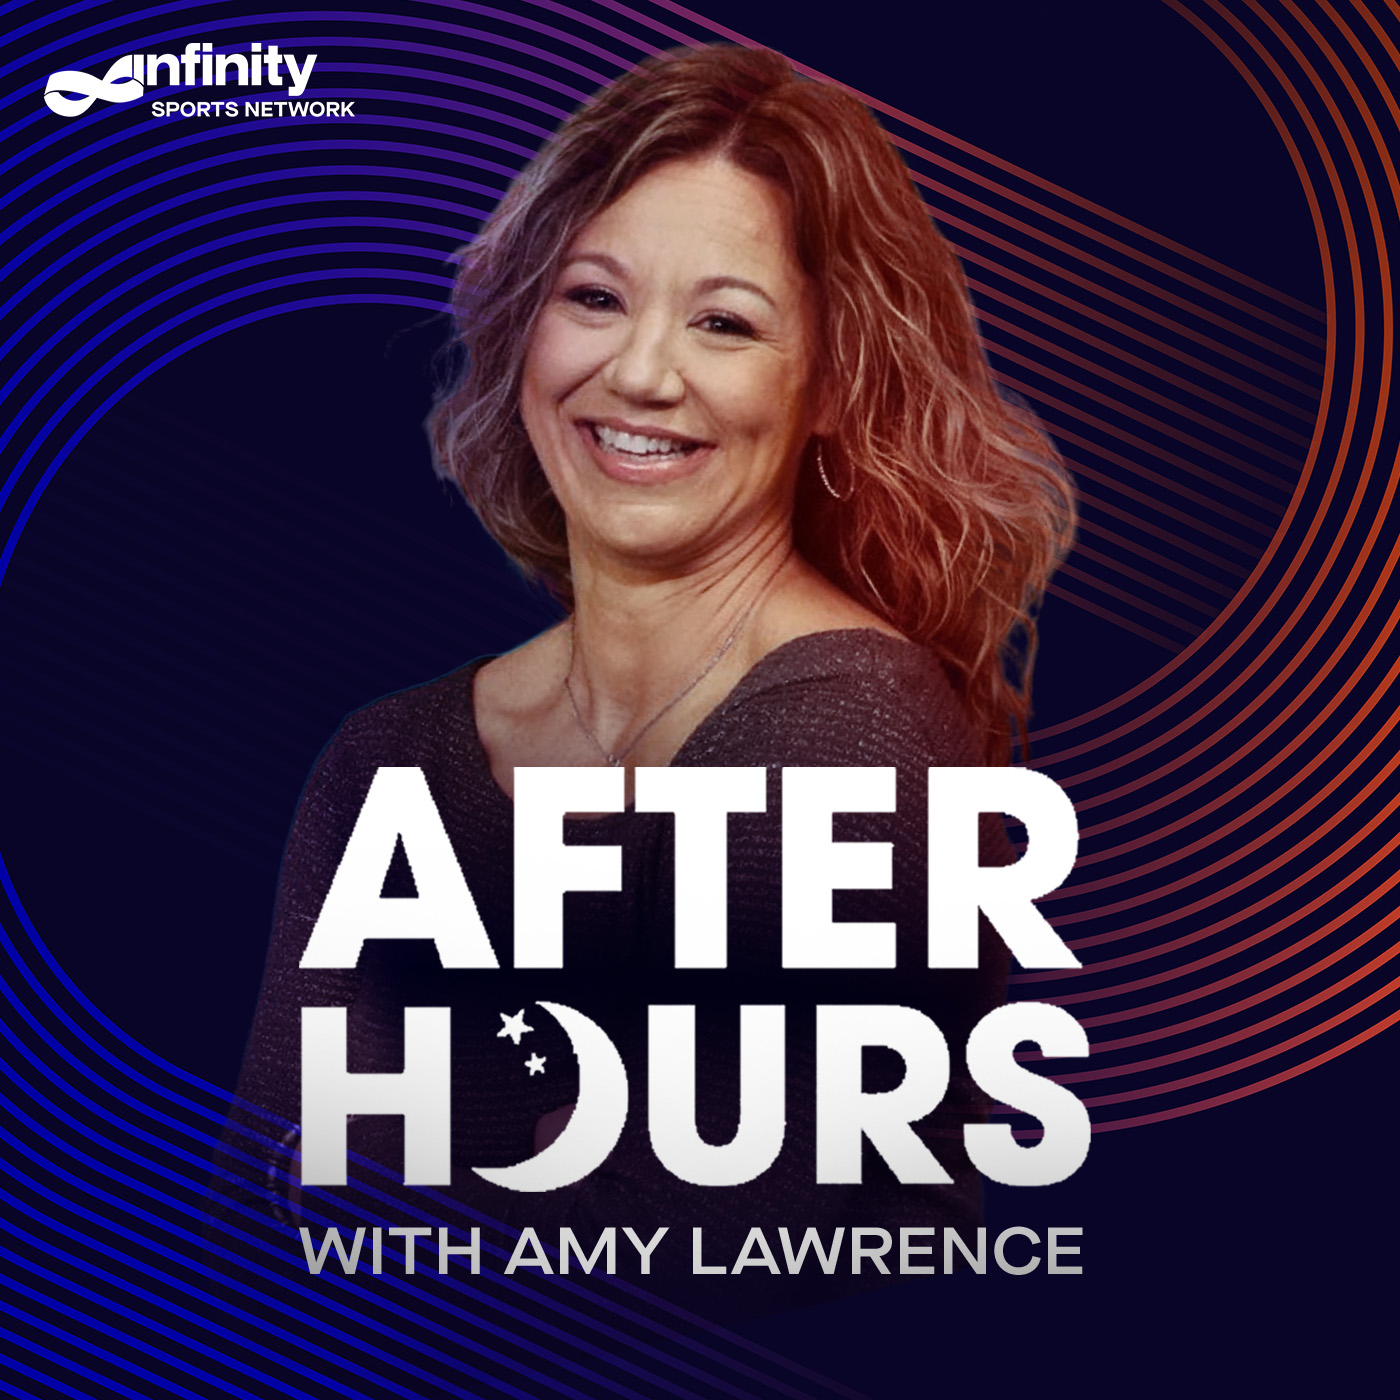 2-15-22 After Hours with Amy Lawrence PODCAST: Hour 1